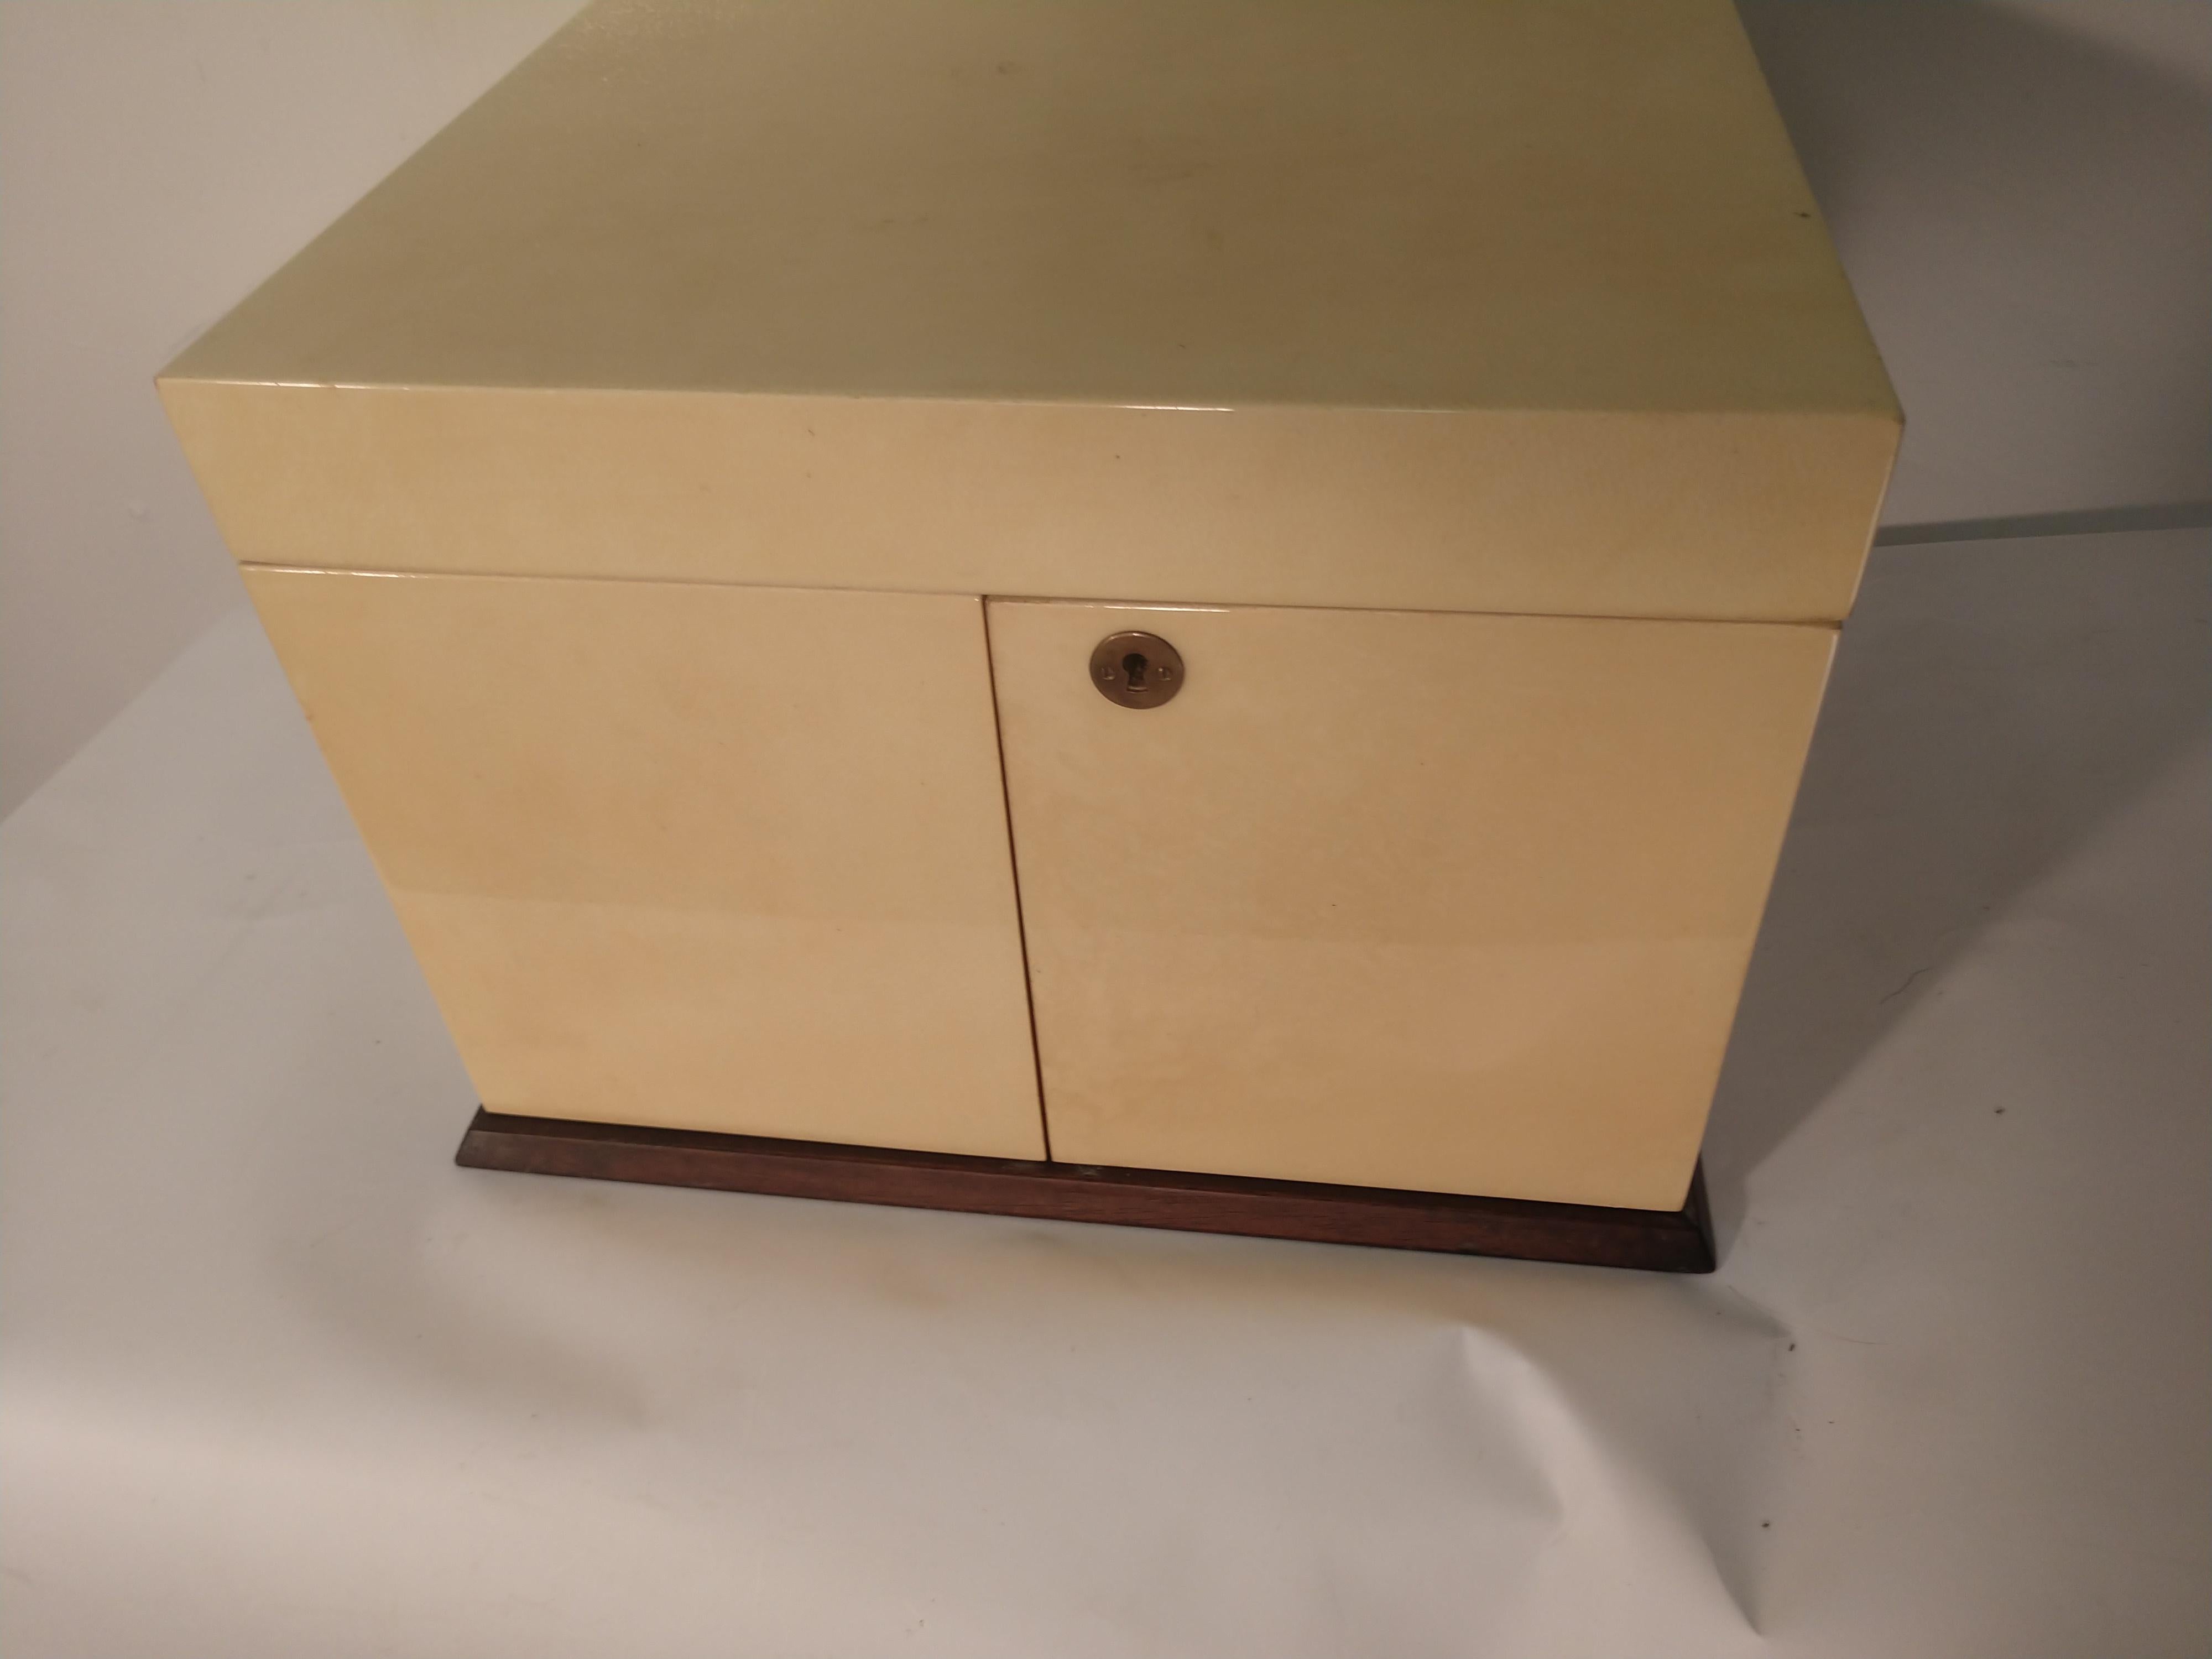 Carved Mid-Century Modern Lacquered Goatskin Humidor by Aldo Tura